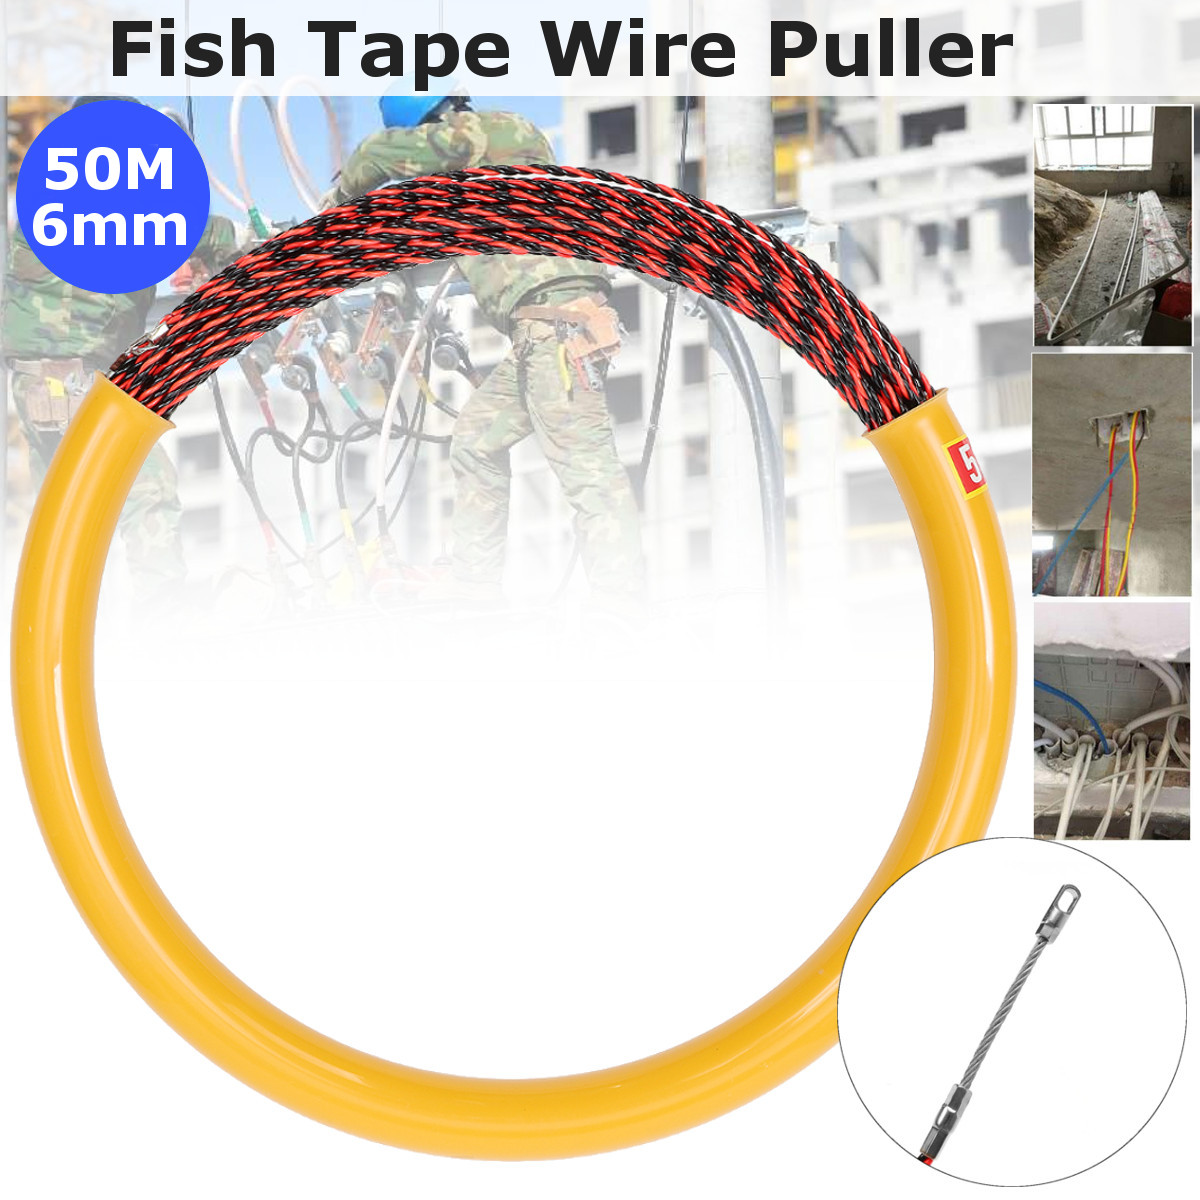 50M-6mm-Spiral-Cable-Push-Puller-Fish-Tape-Reel-Conduit-Ducting-Rodder-Pulling-Puller-1323184-1